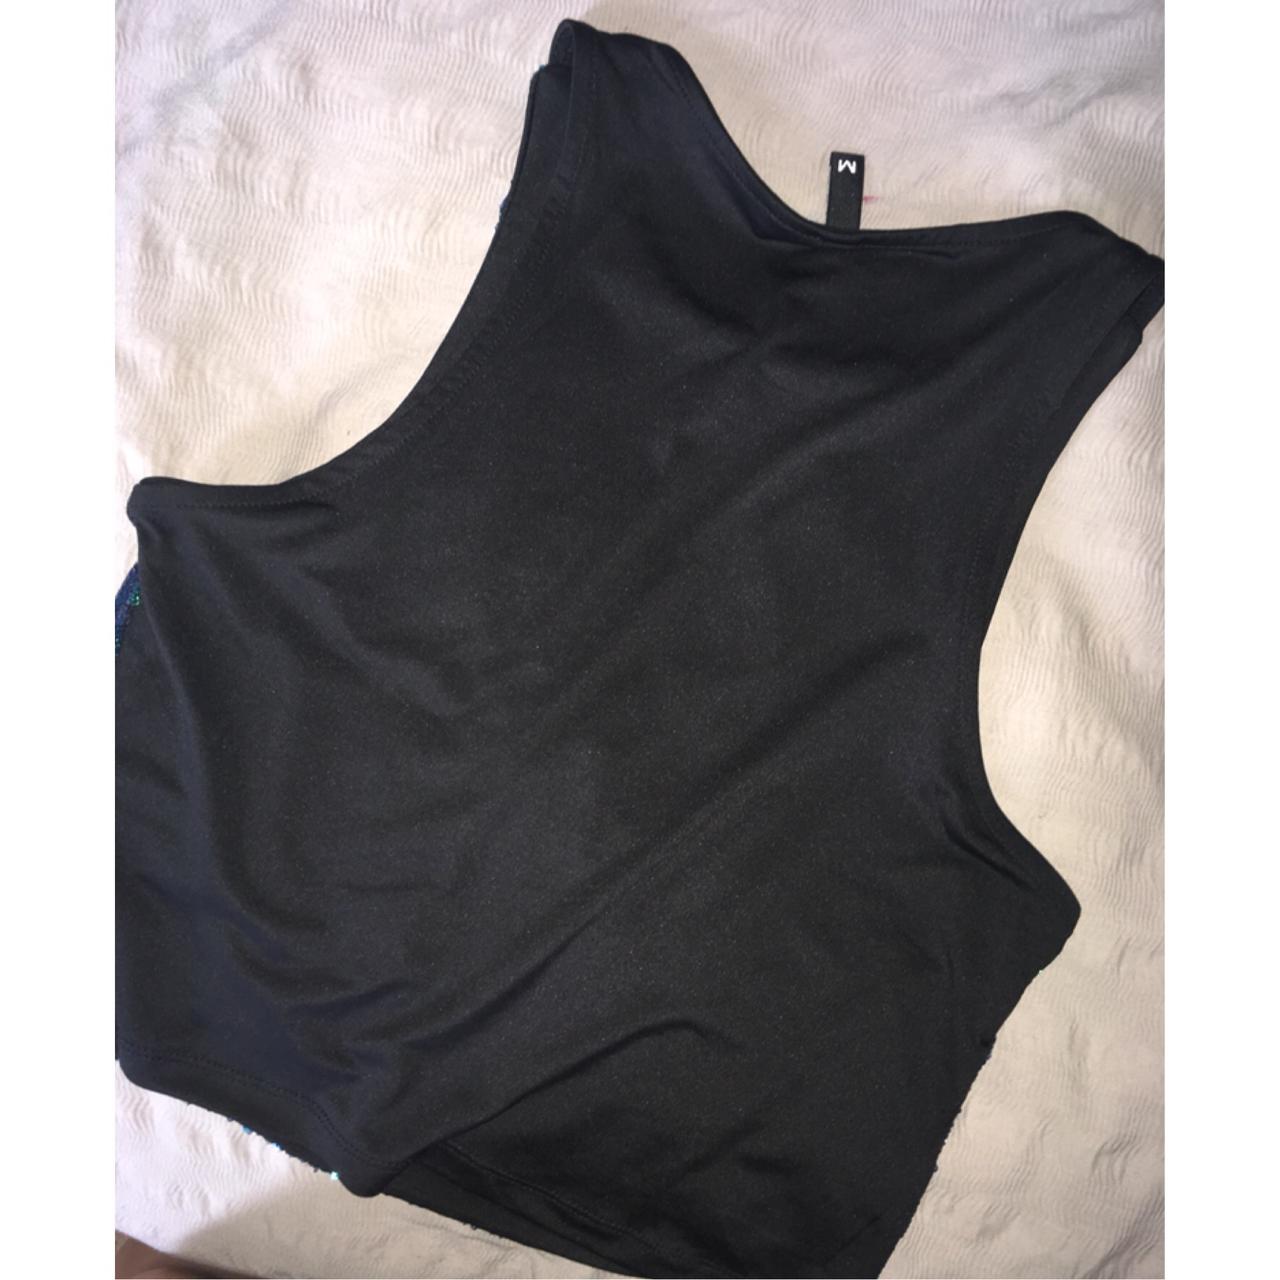 H&M green/turquoise sequin vest style crop top in a... - Depop